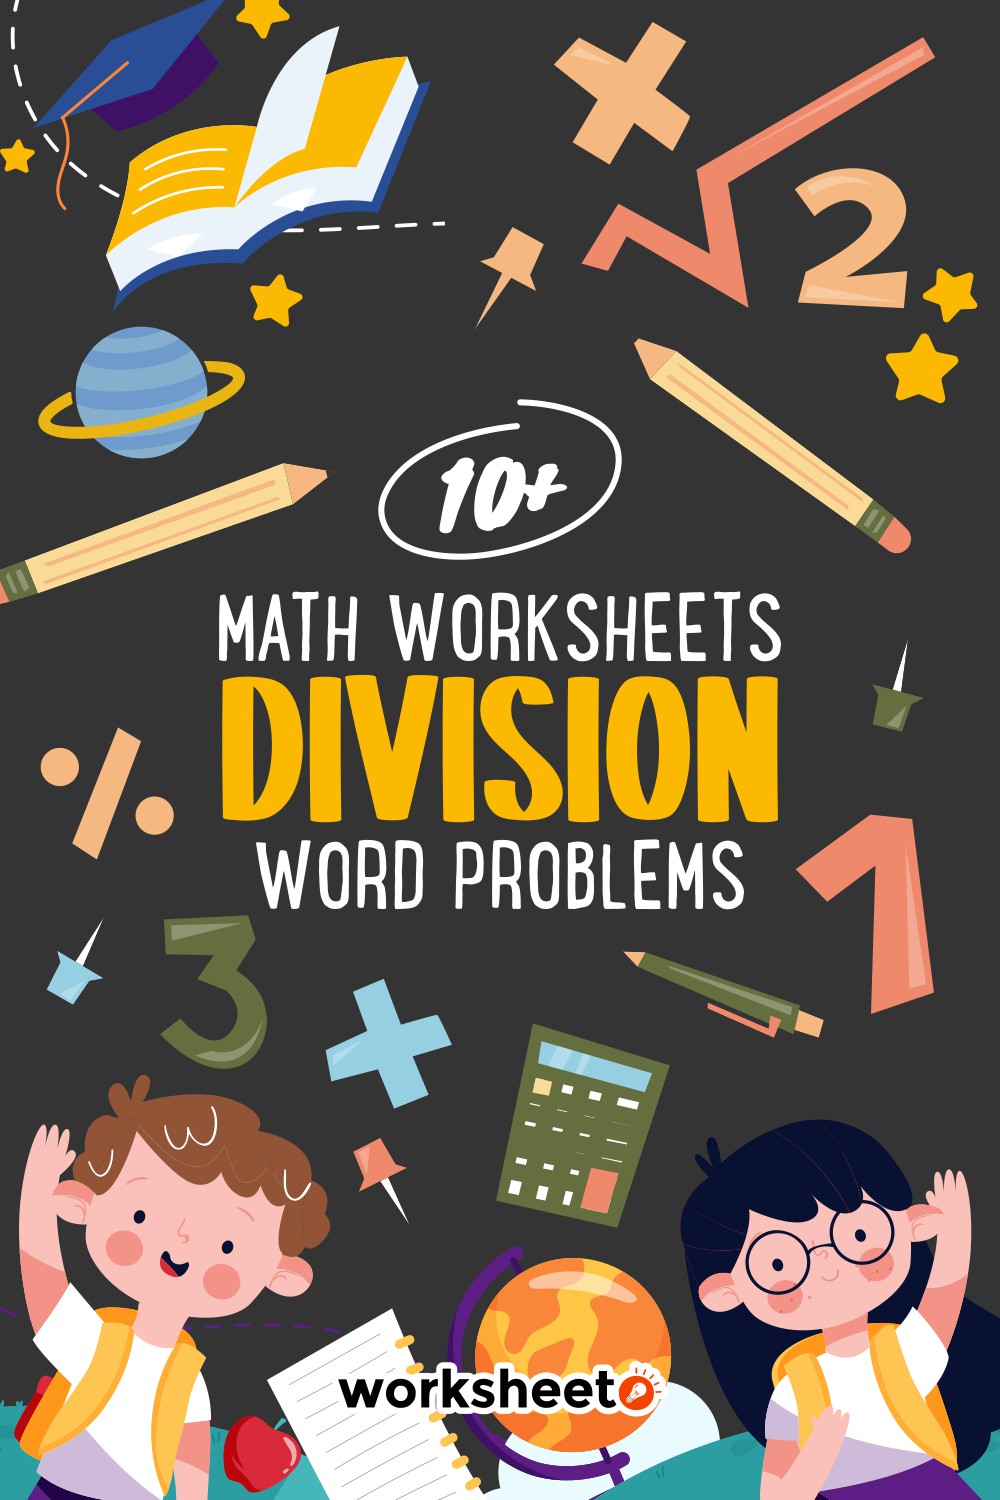 Math Worksheets Division Word Problems